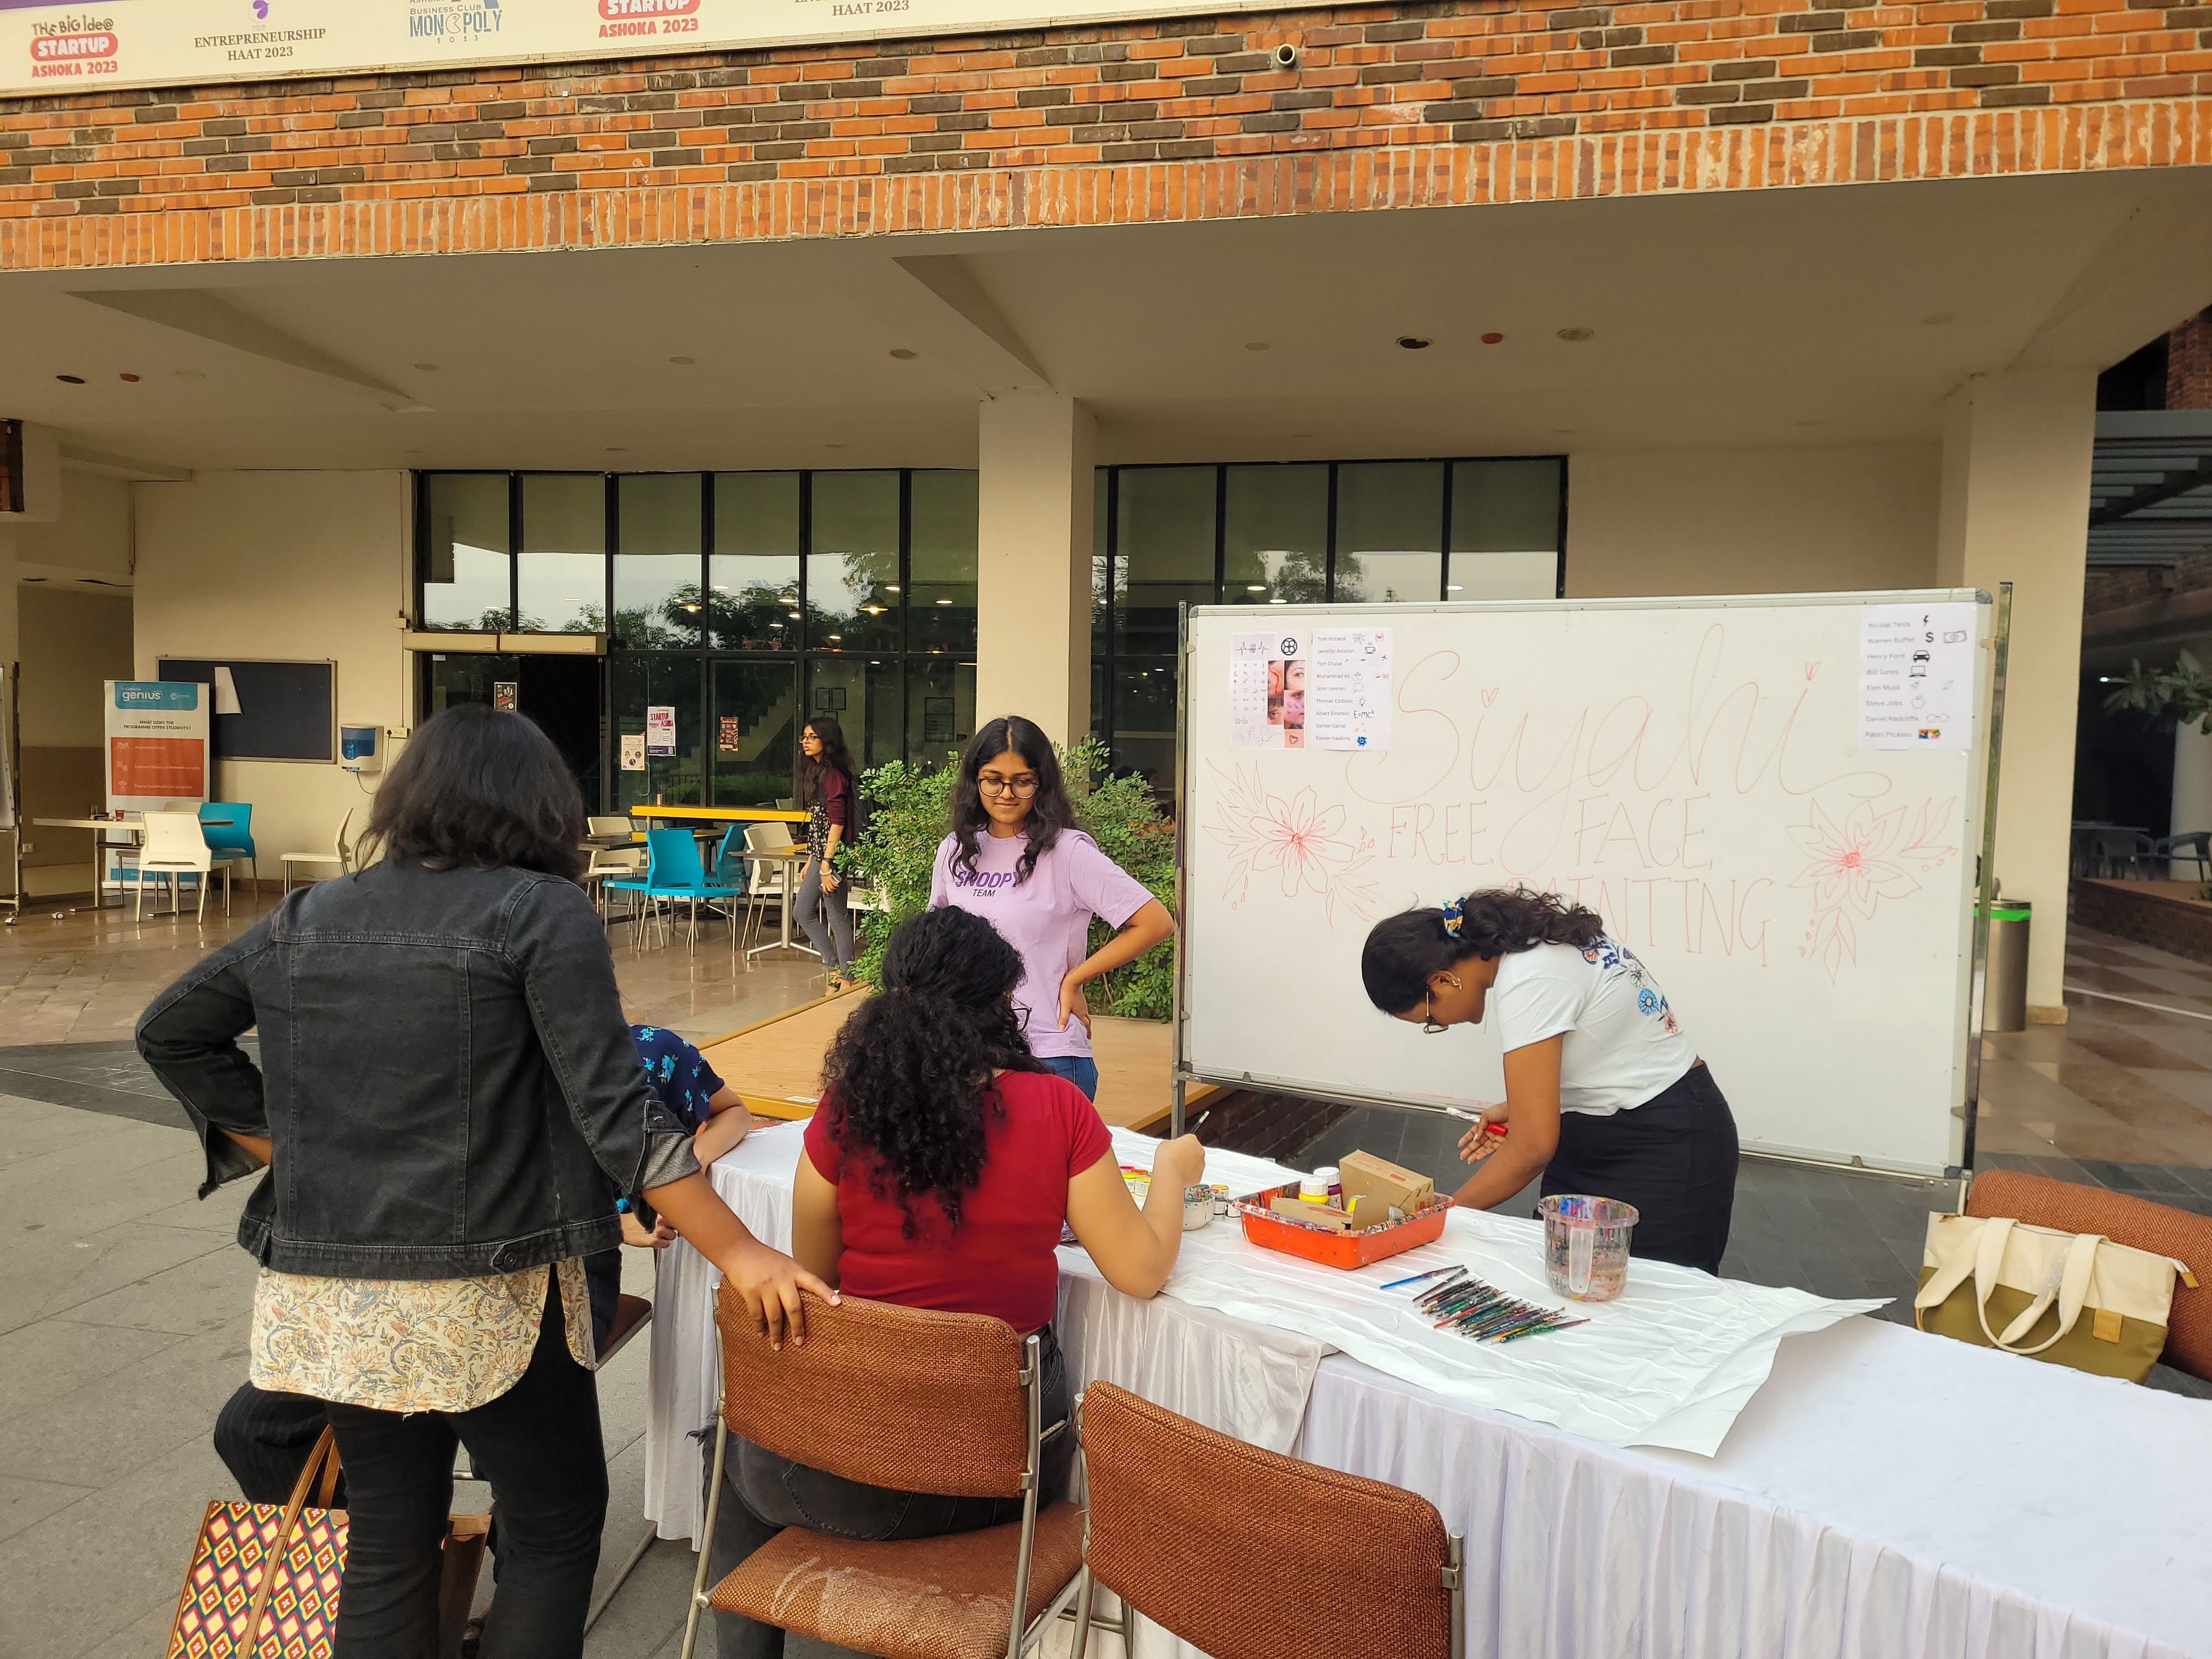 Face painting stall by art society